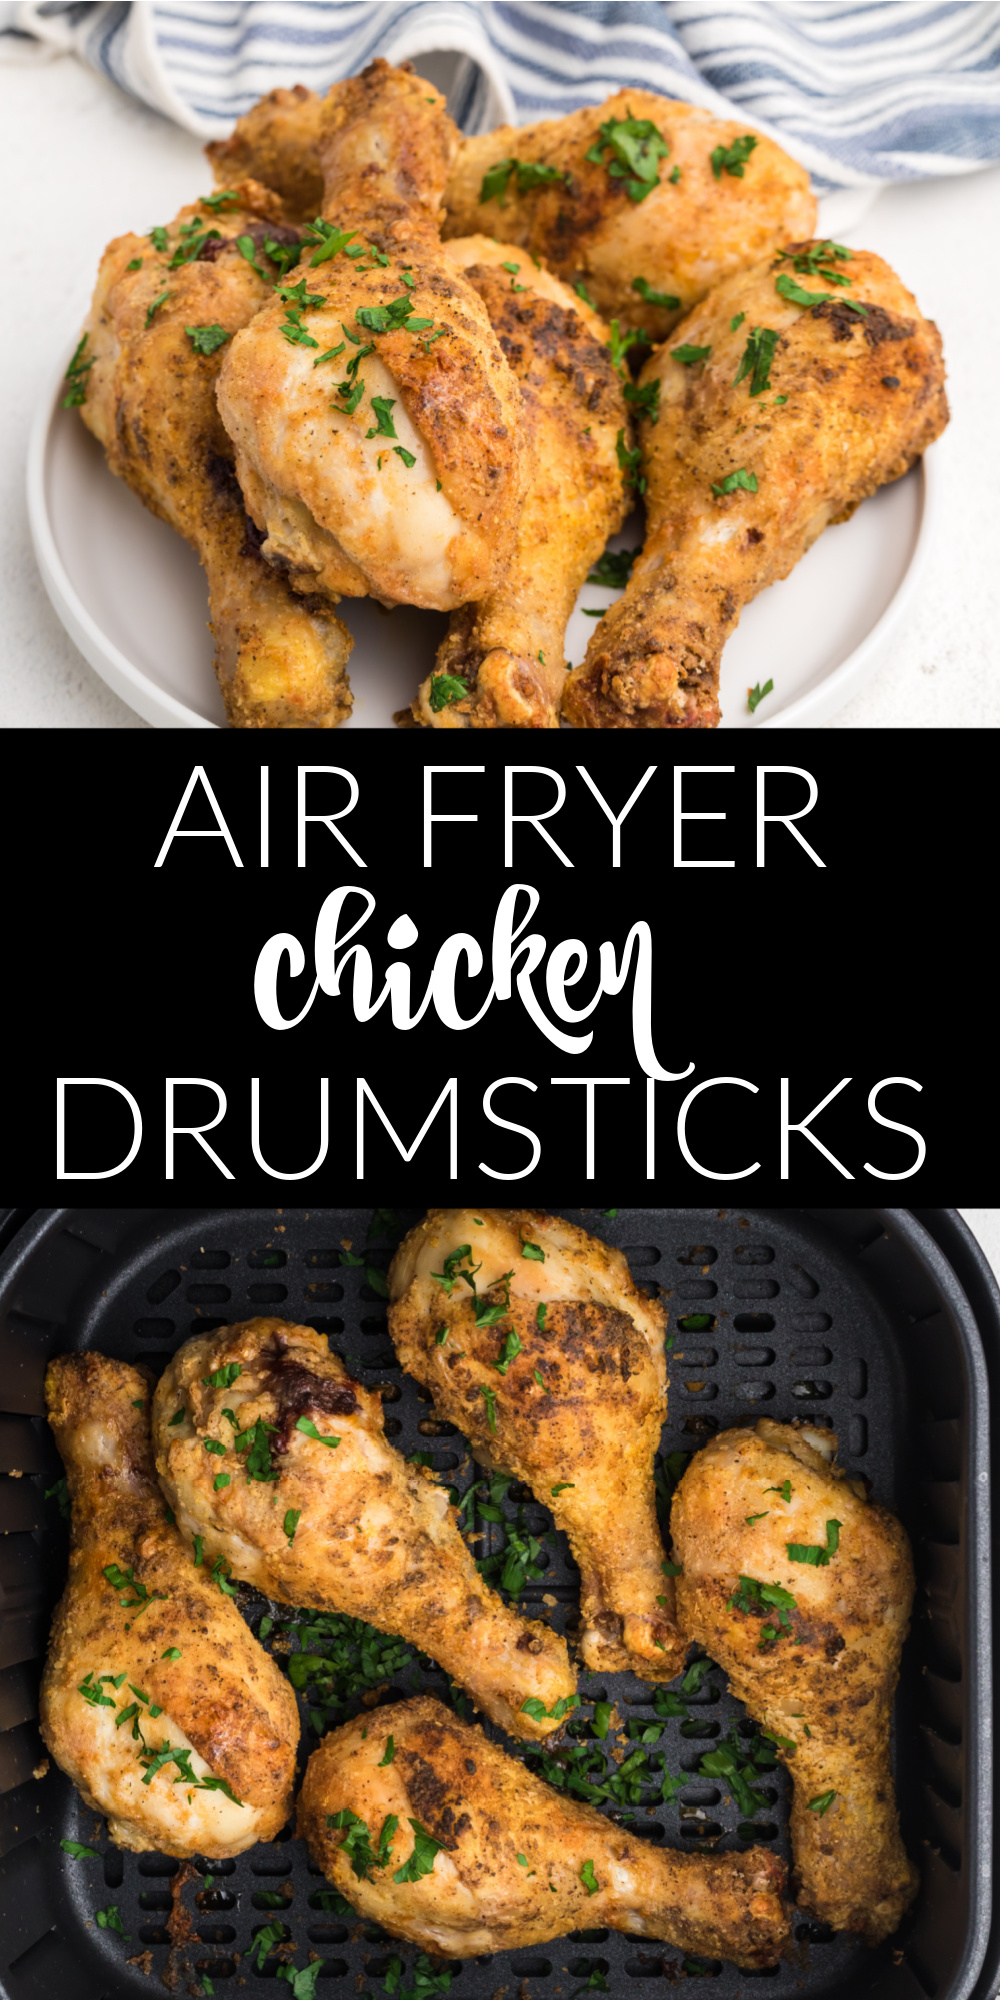 These air fryer drumsticks are tossed in garlic and paired with sweet and smokey paprika. Every bite is juicy, flavorful, and cooked to perfection. These mouthwatering air fryer chicken legs are oh so crispy on the outside while being unbelievably tender on the inside - warning you might just need a bib to eat them!